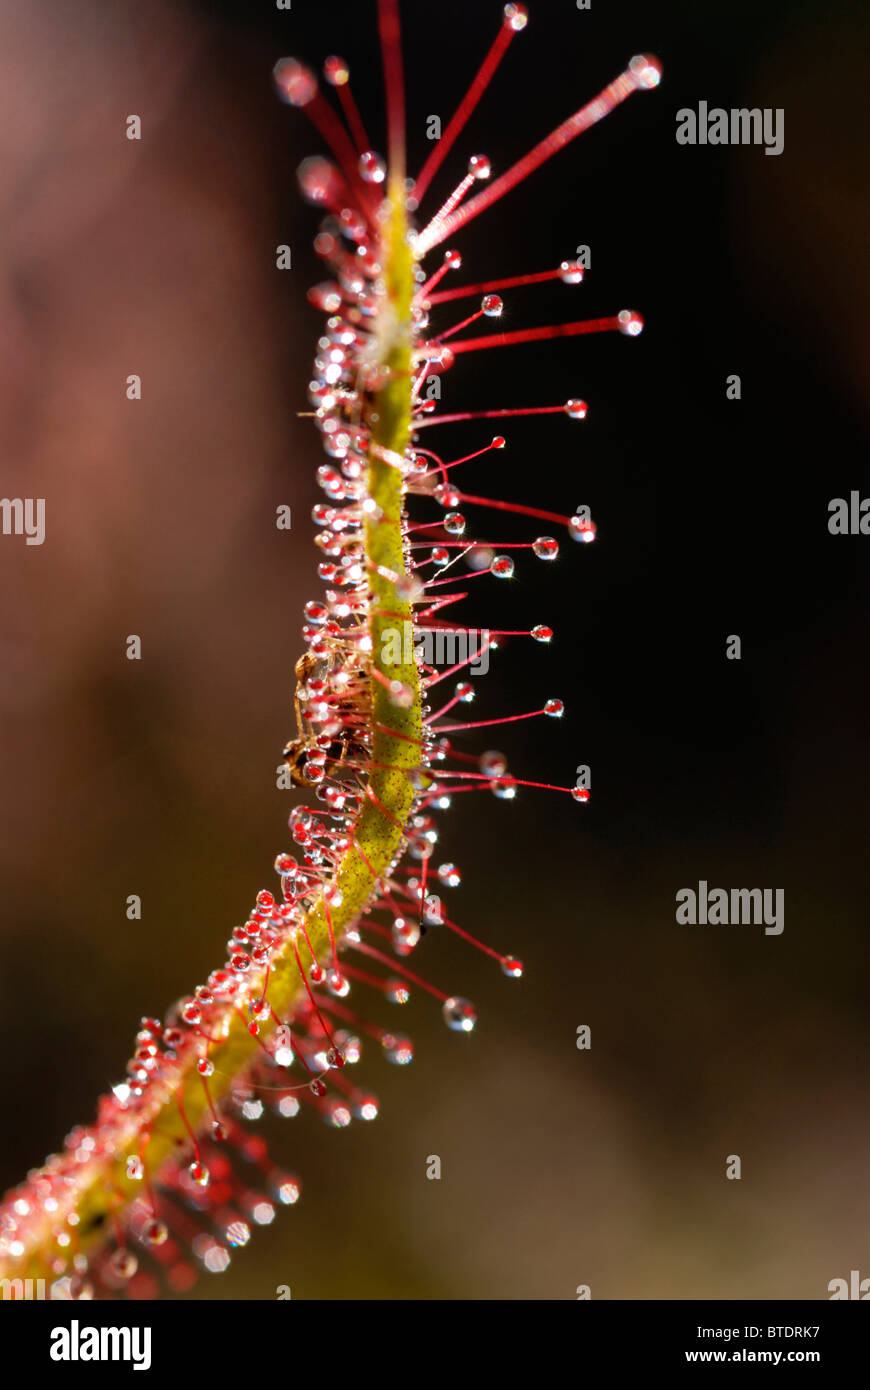 Sundew plant showing stems with sticky nodules Stock Photo